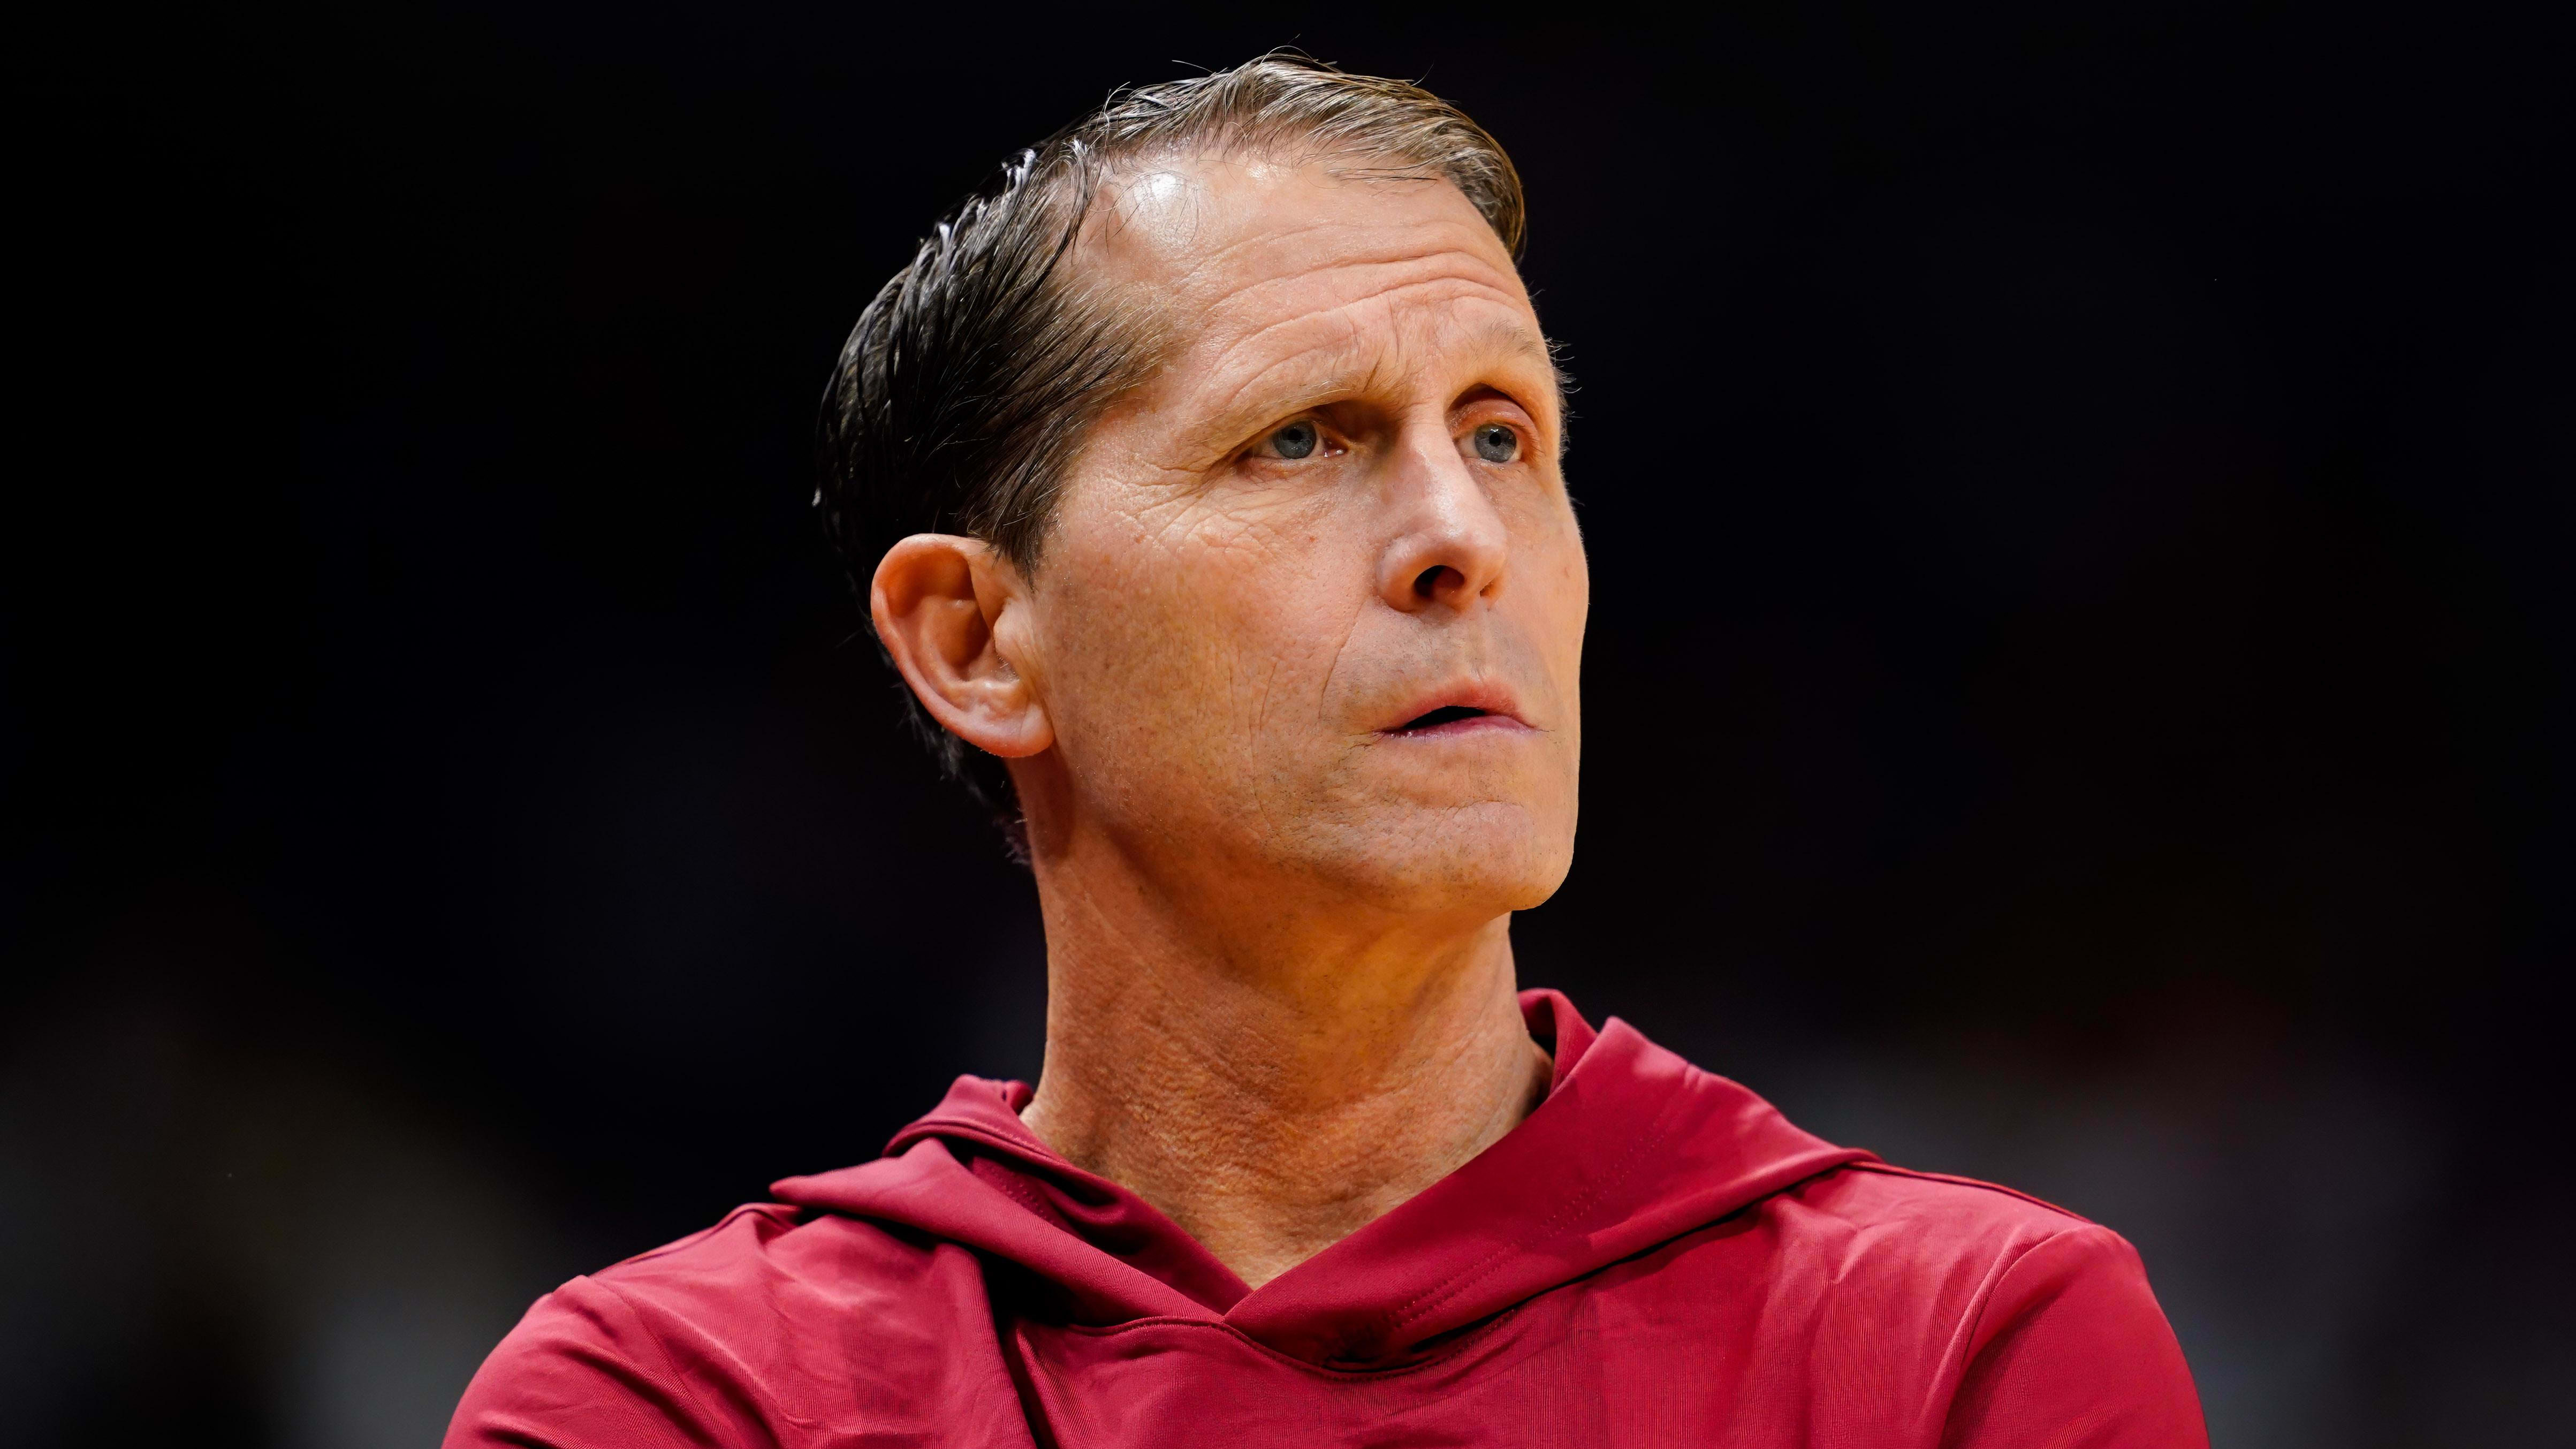 Musselman rebuilt Arkansas and now has a chance to bring some new energy to USC.